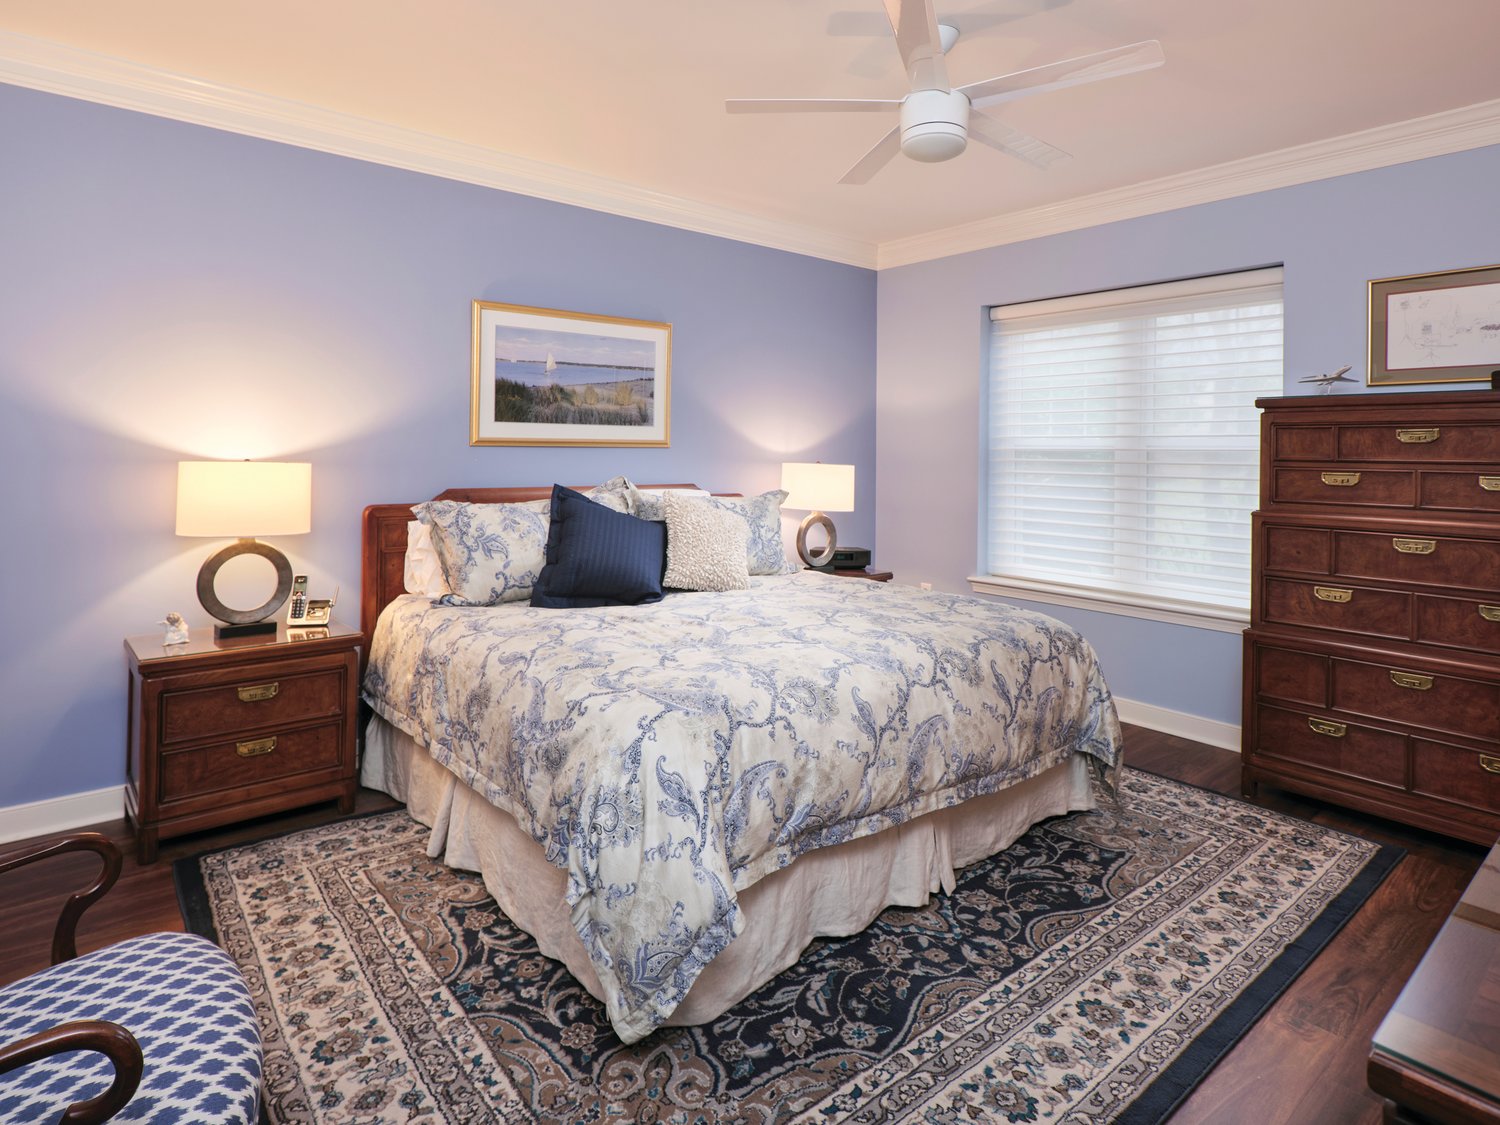 The blue and gray colors throughout the apartment are continued in the master bedroom.